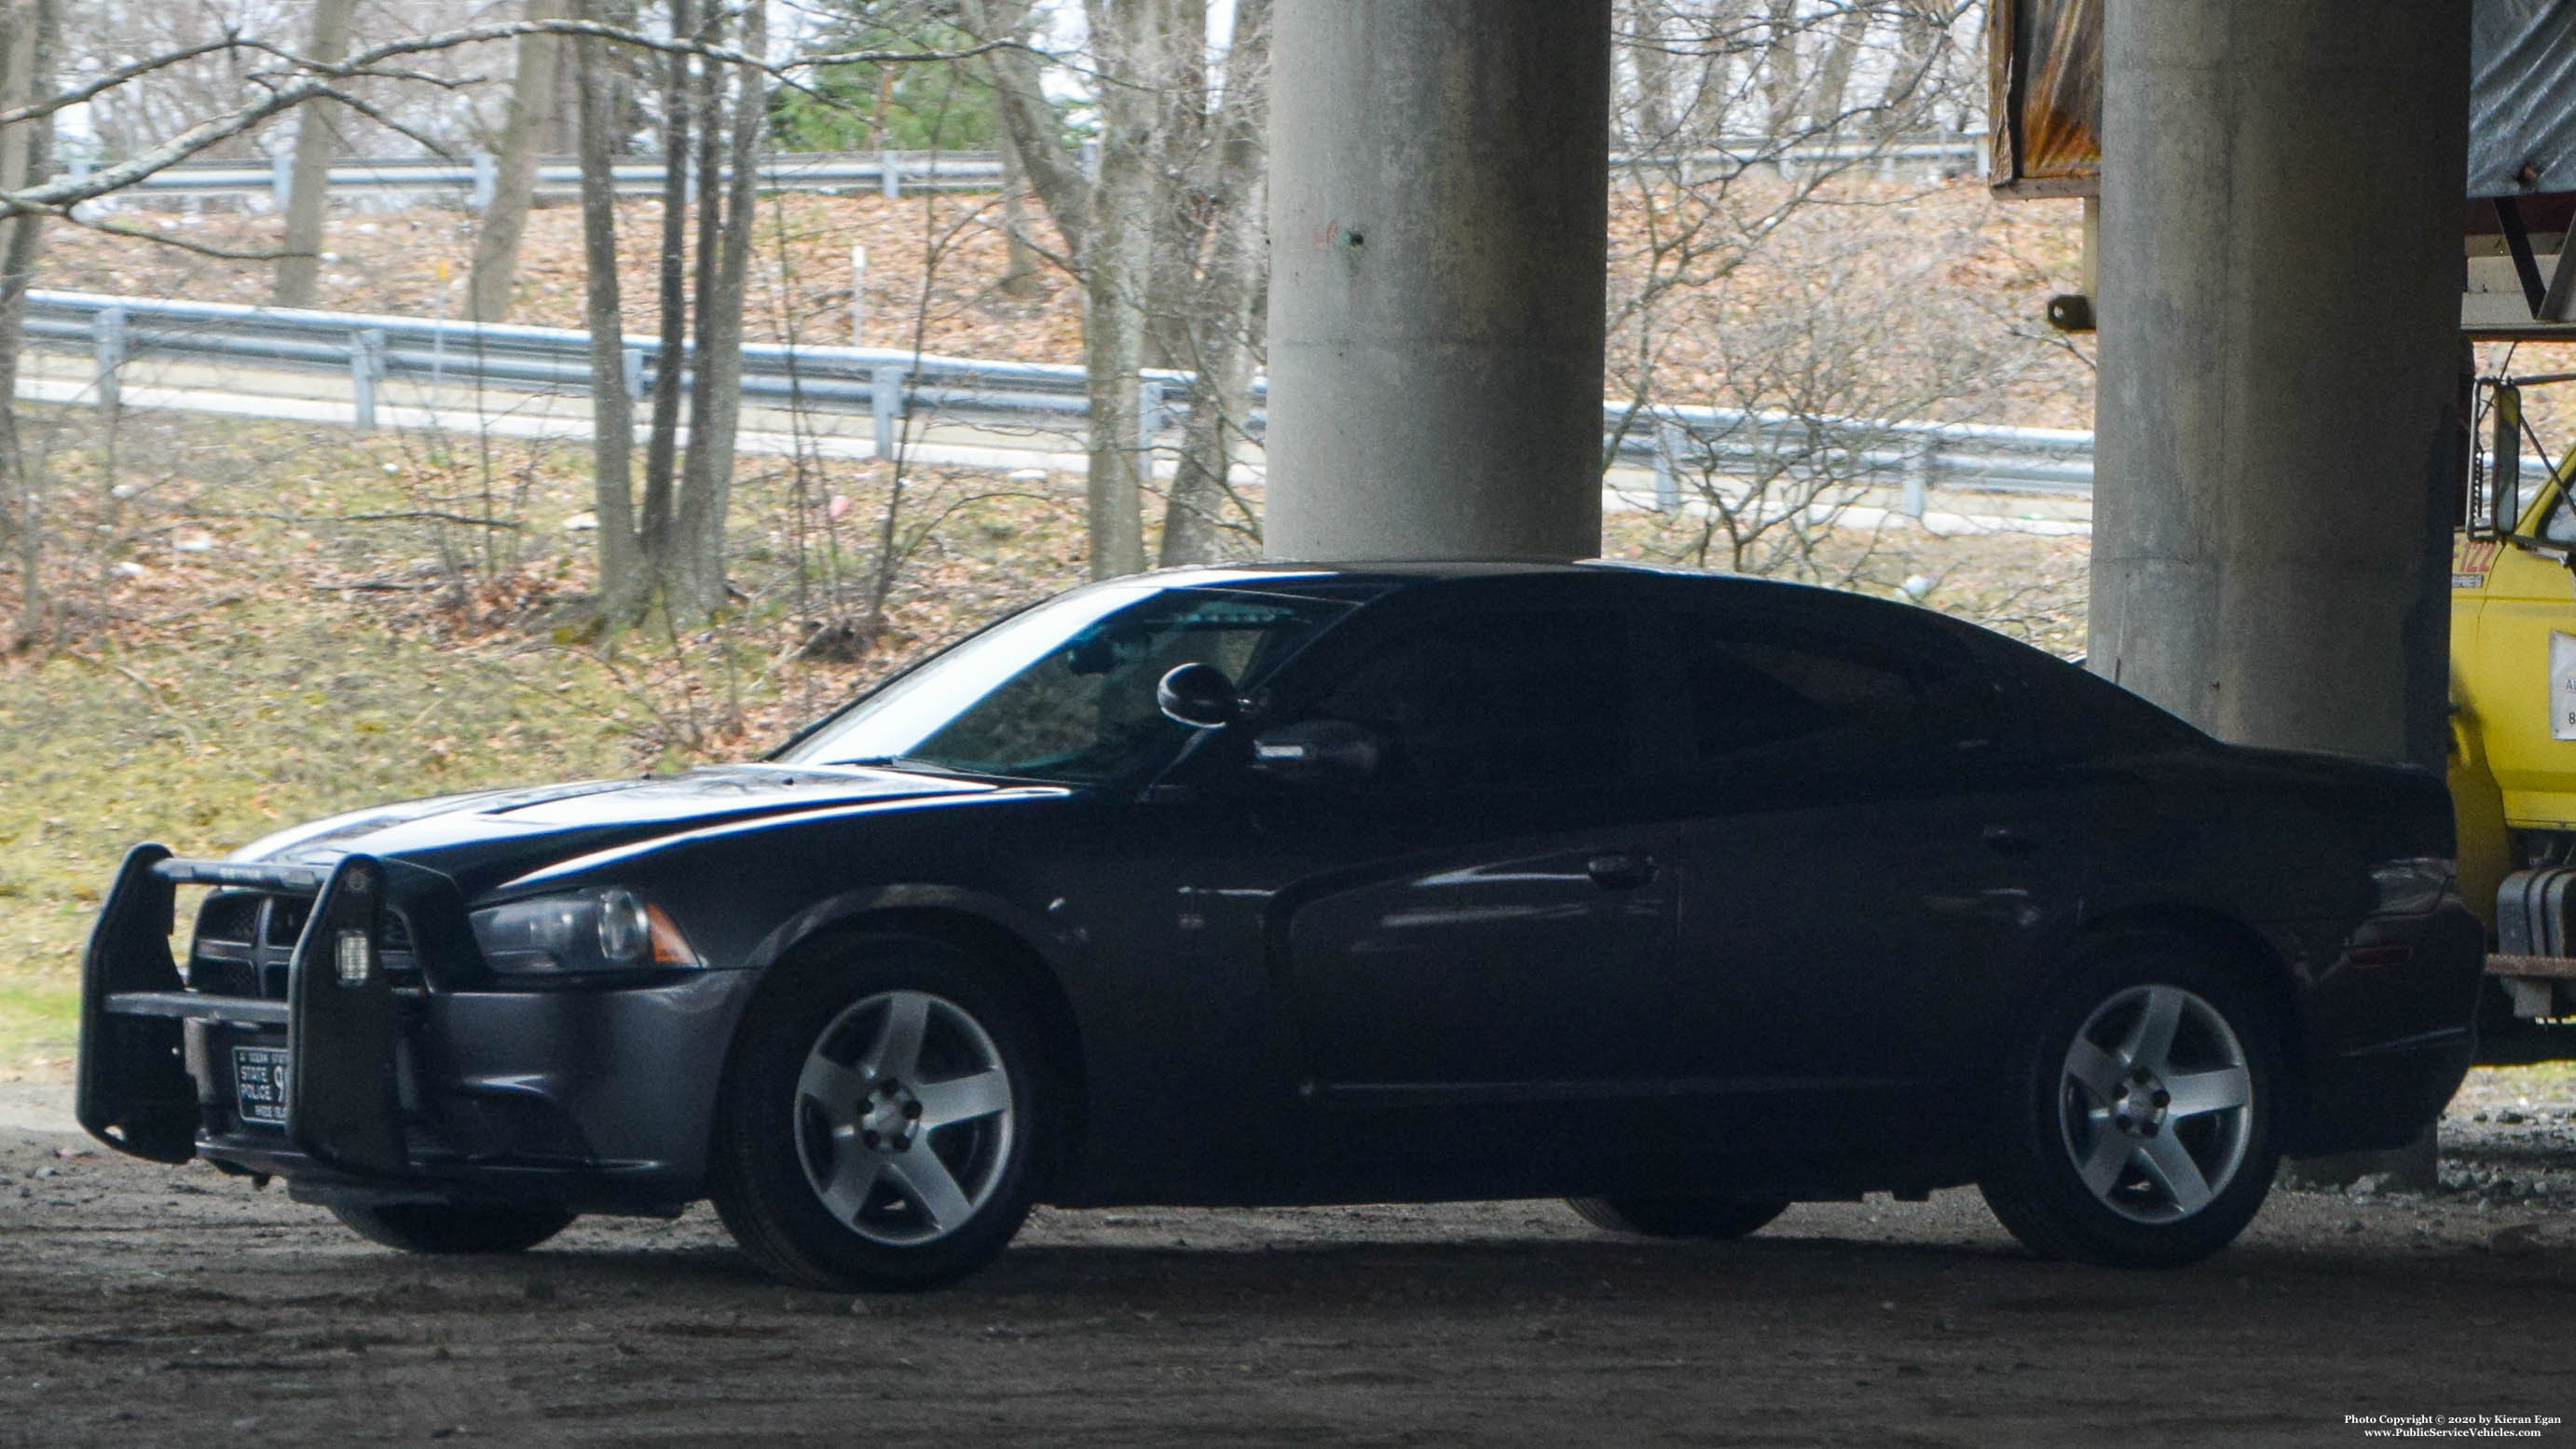 A photo  of Rhode Island State Police
            Cruiser 994, a 2013 Dodge Charger             taken by Kieran Egan